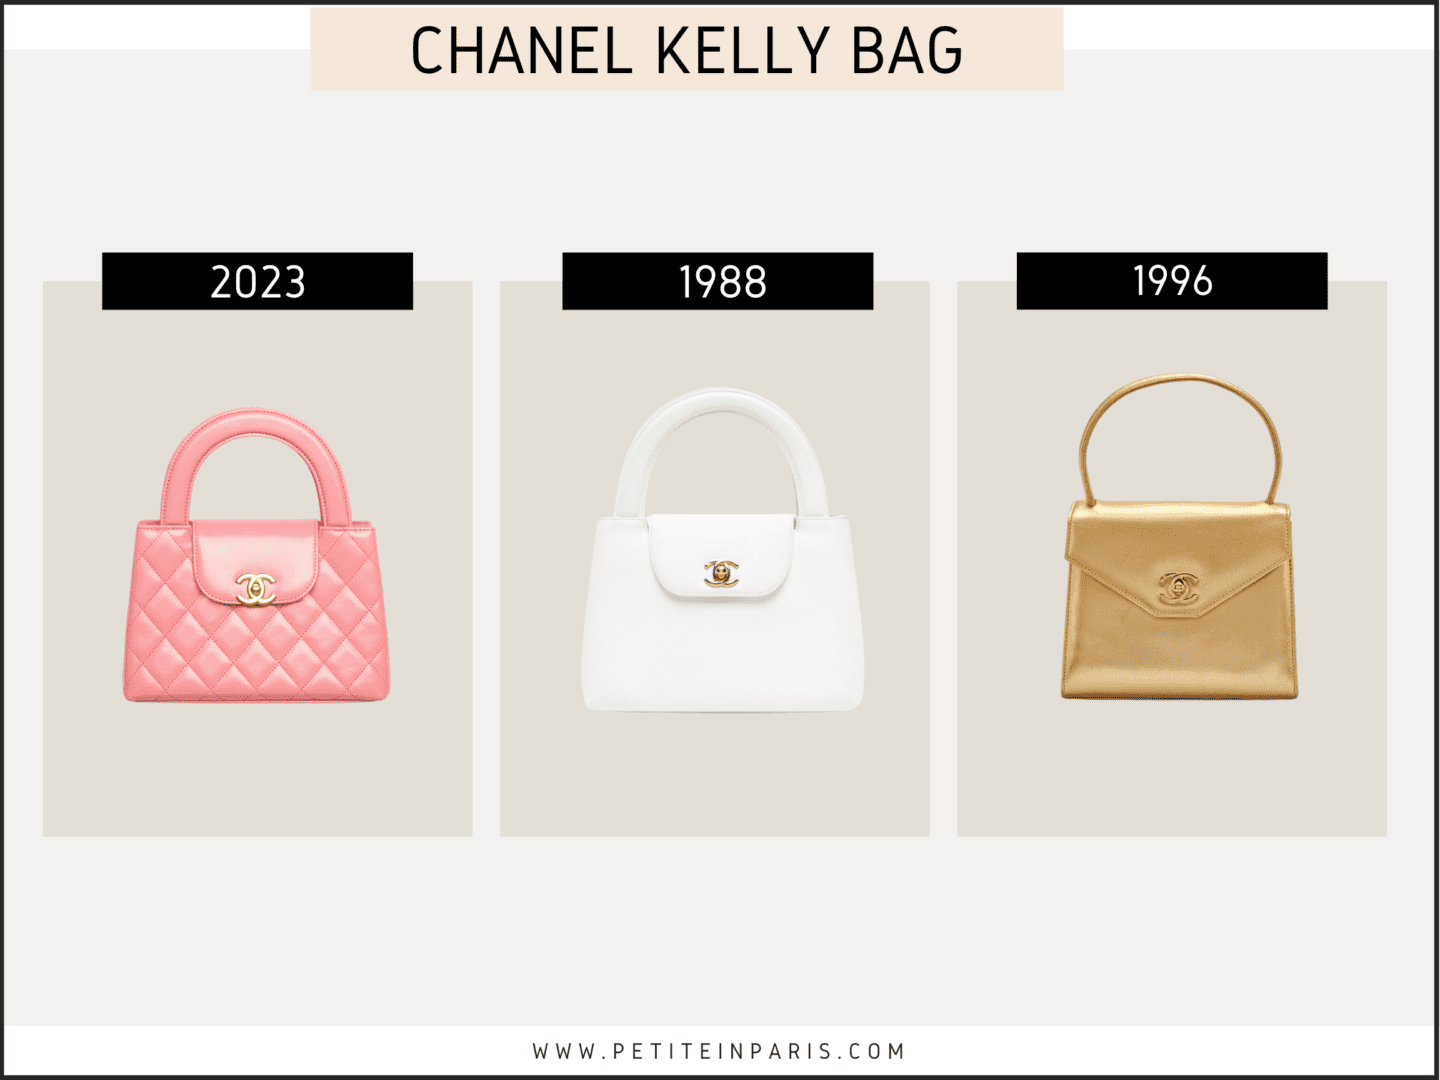 New Chanel Kelly Bag and vintage Chanel bag